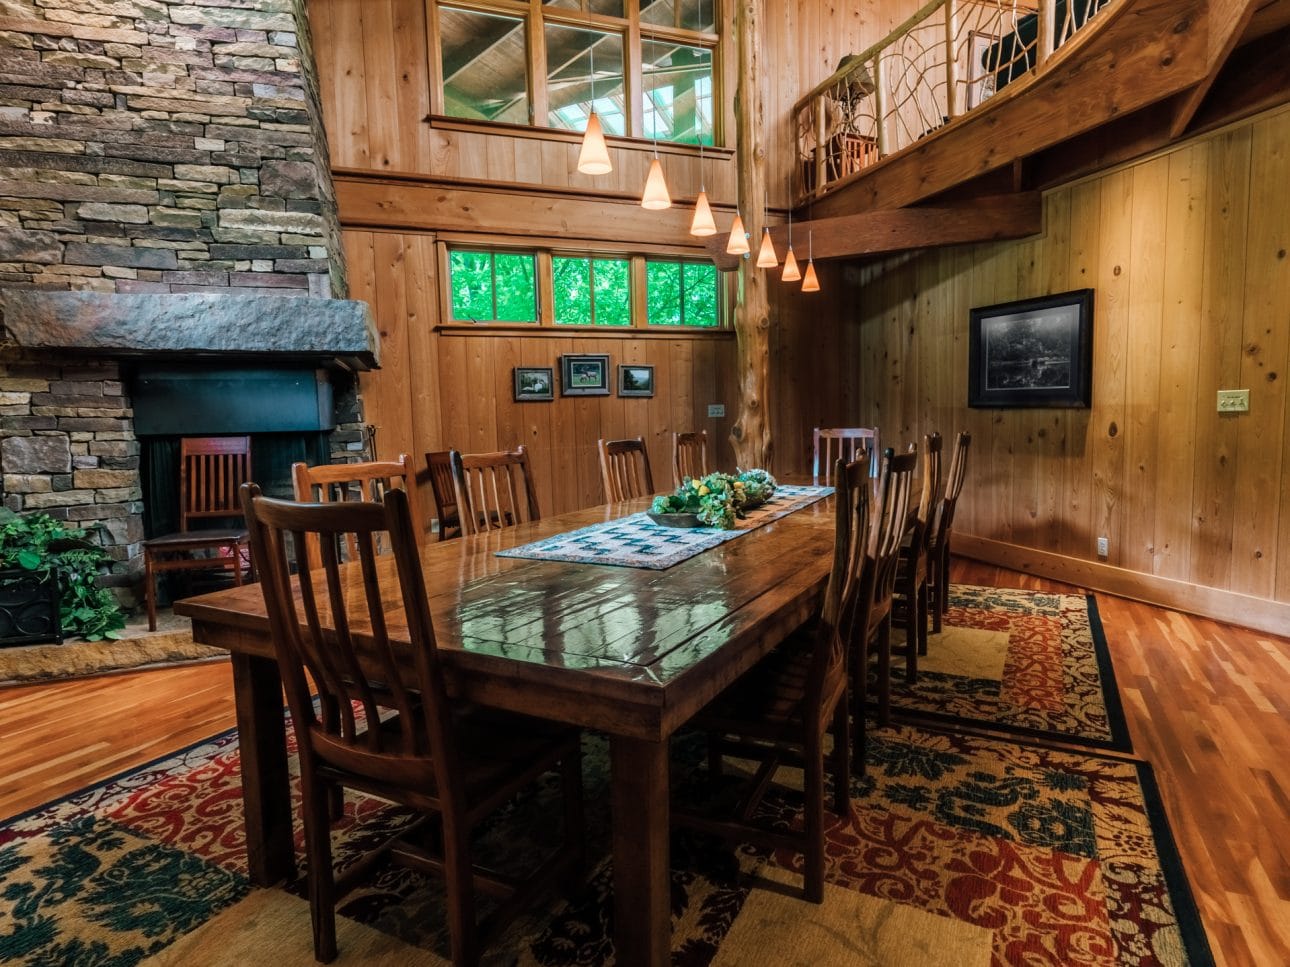 A 14-person, custom-built table graces the lodge's formal dining area